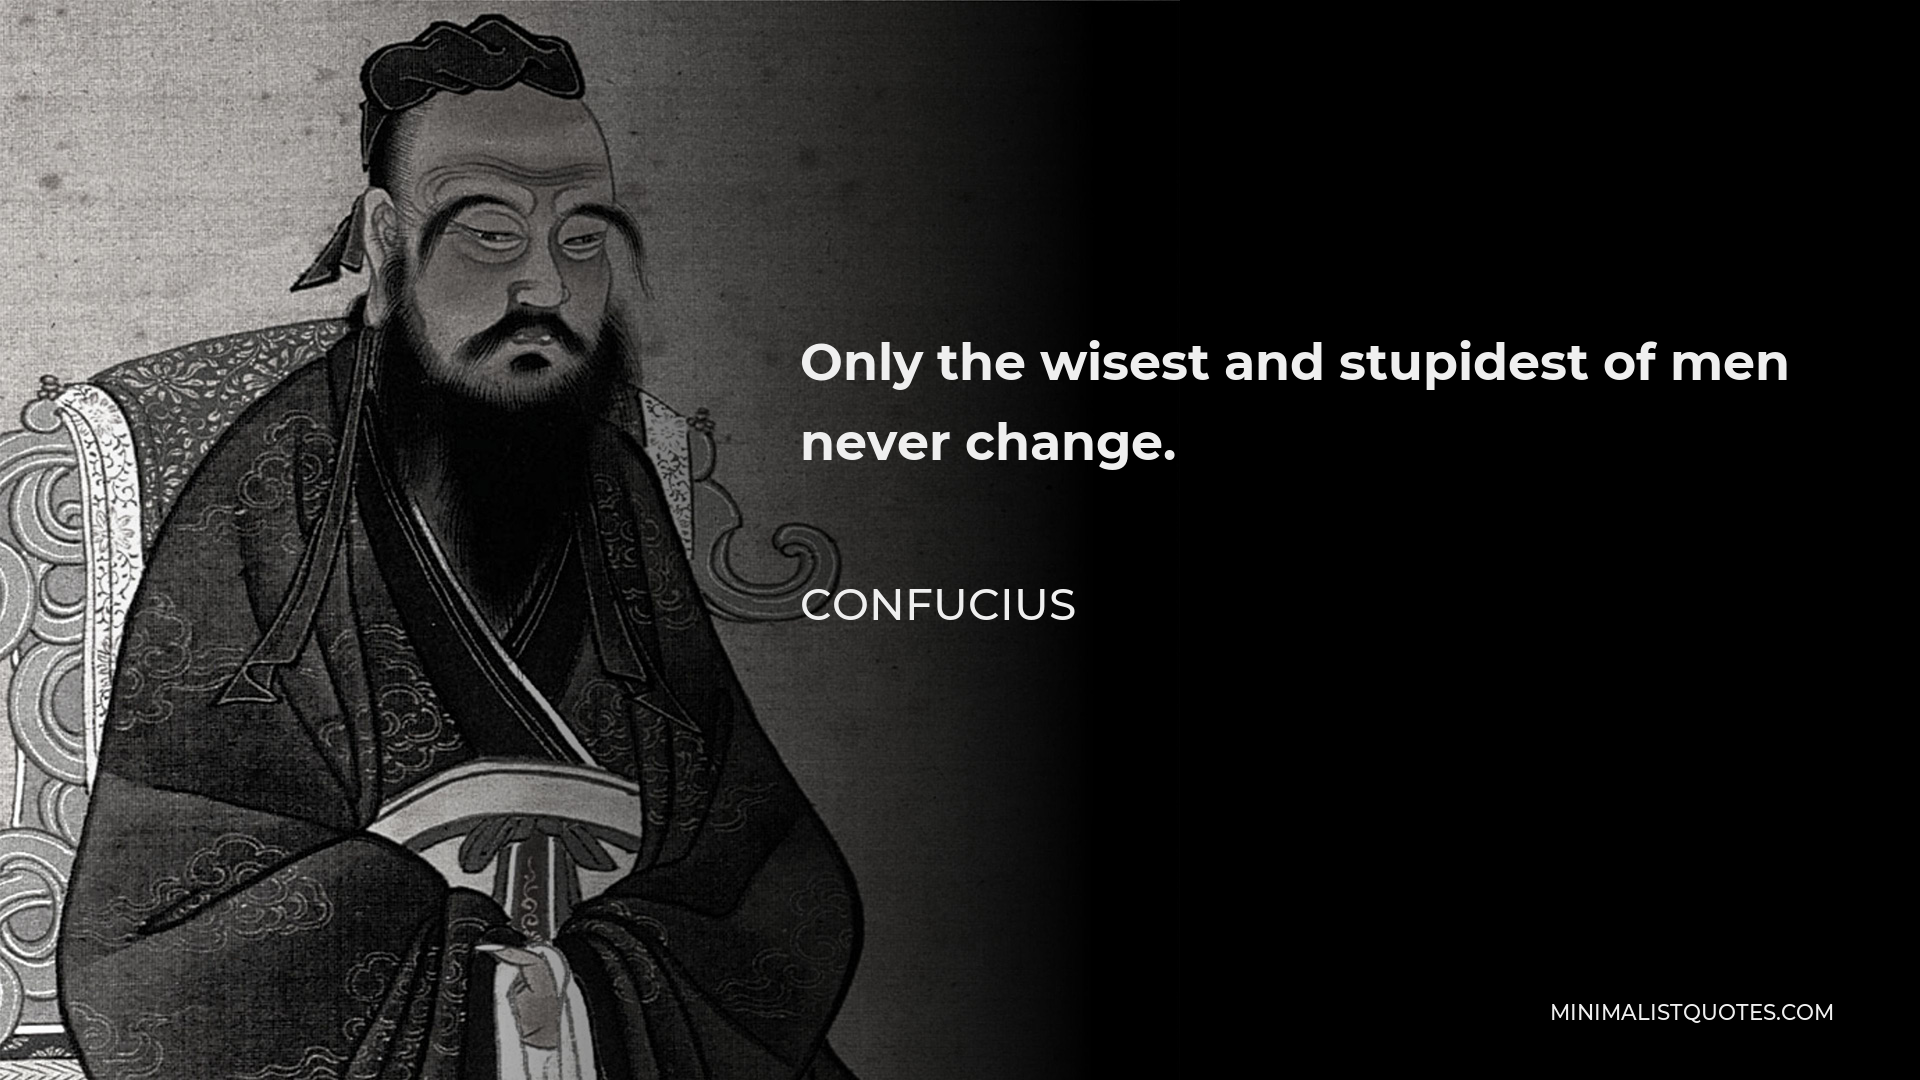 Confucius Quote - Only the wisest and stupidest of men never change.